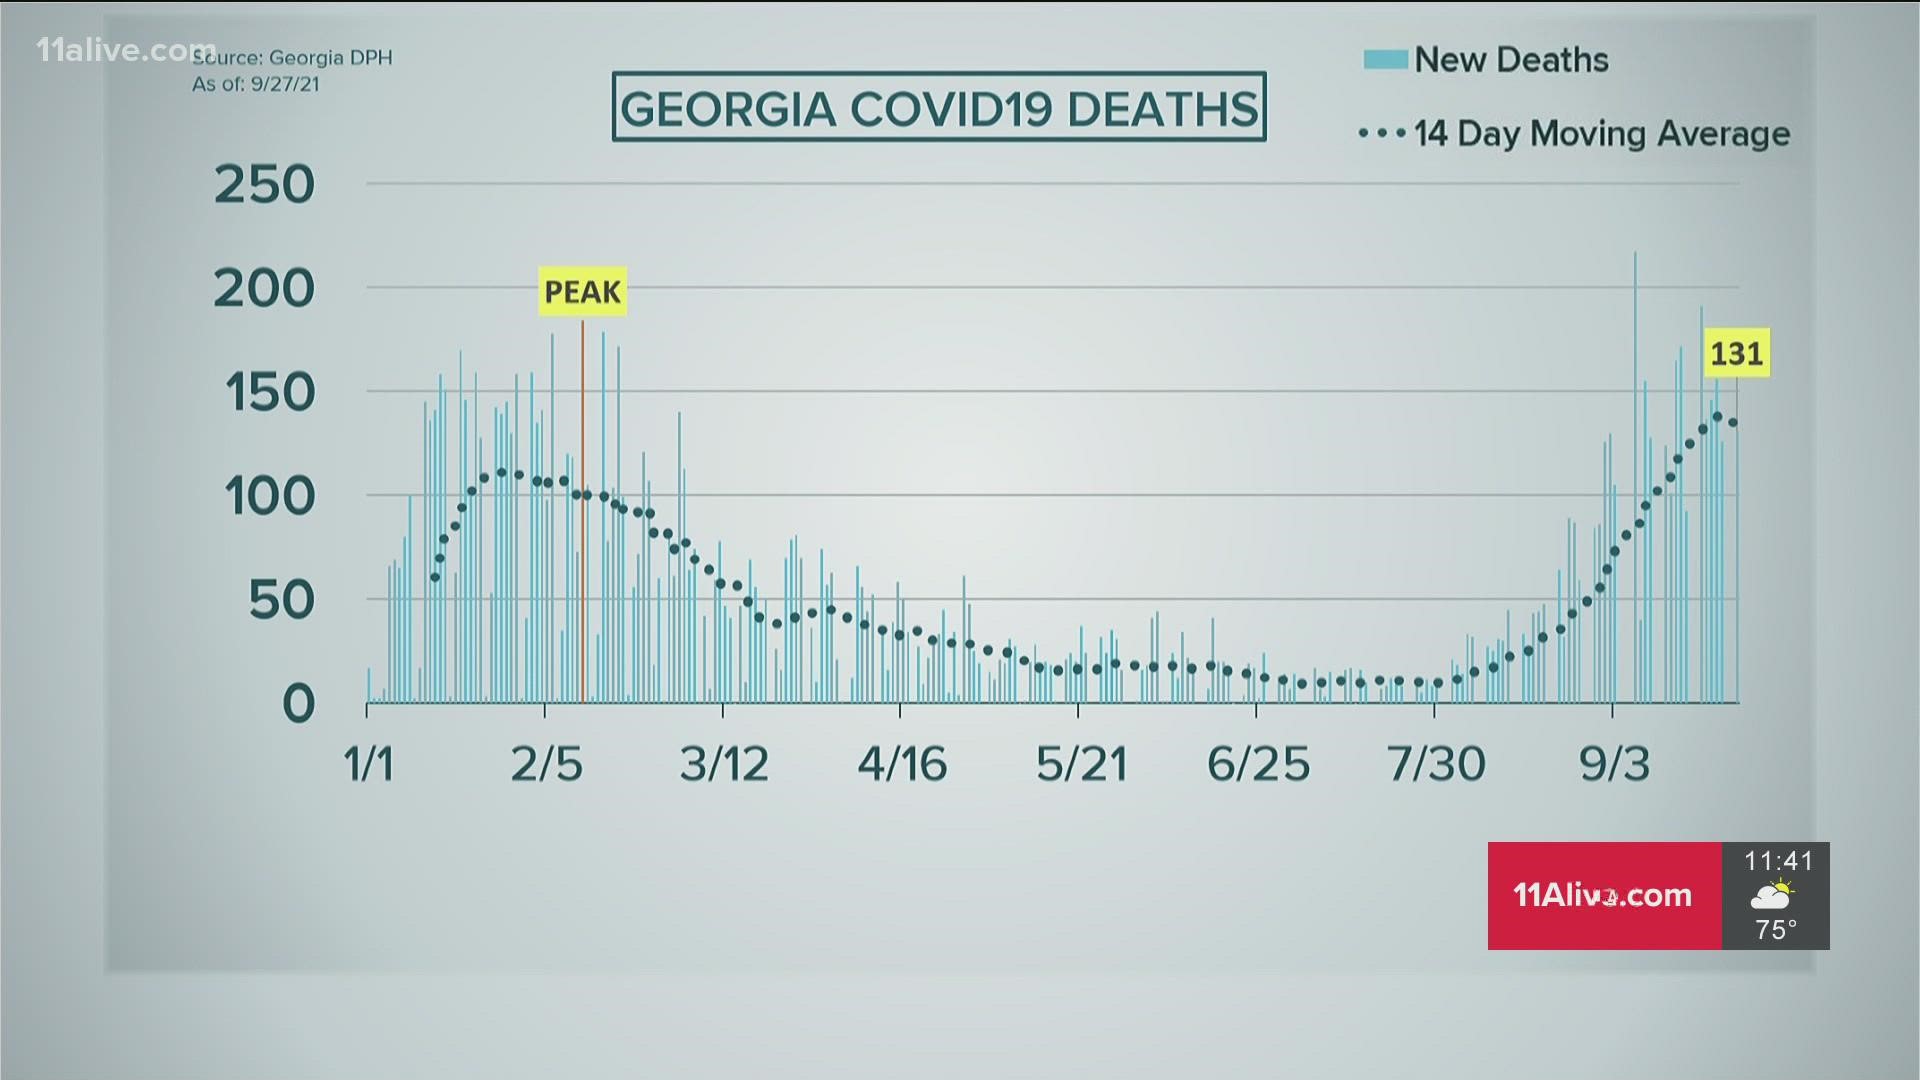 Georgia's death toll now surpasses 22,000 since the pandemic started.